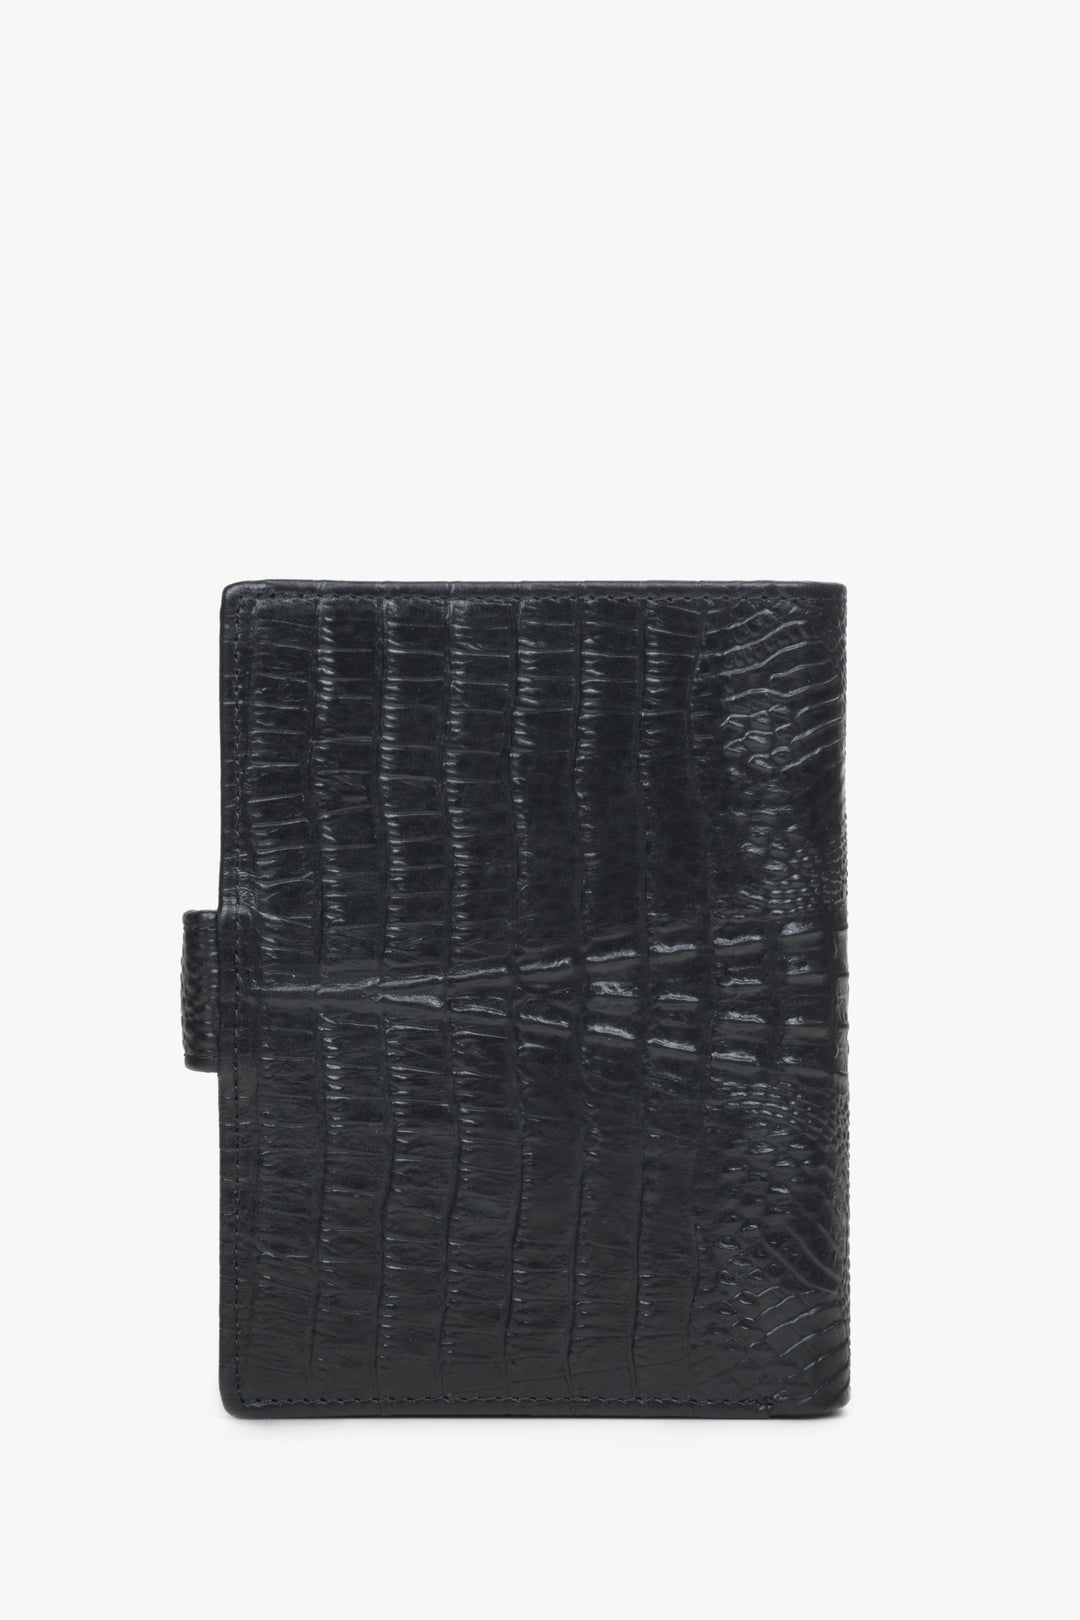 Black functional men's wallet made of genuine leather by Estro - back.